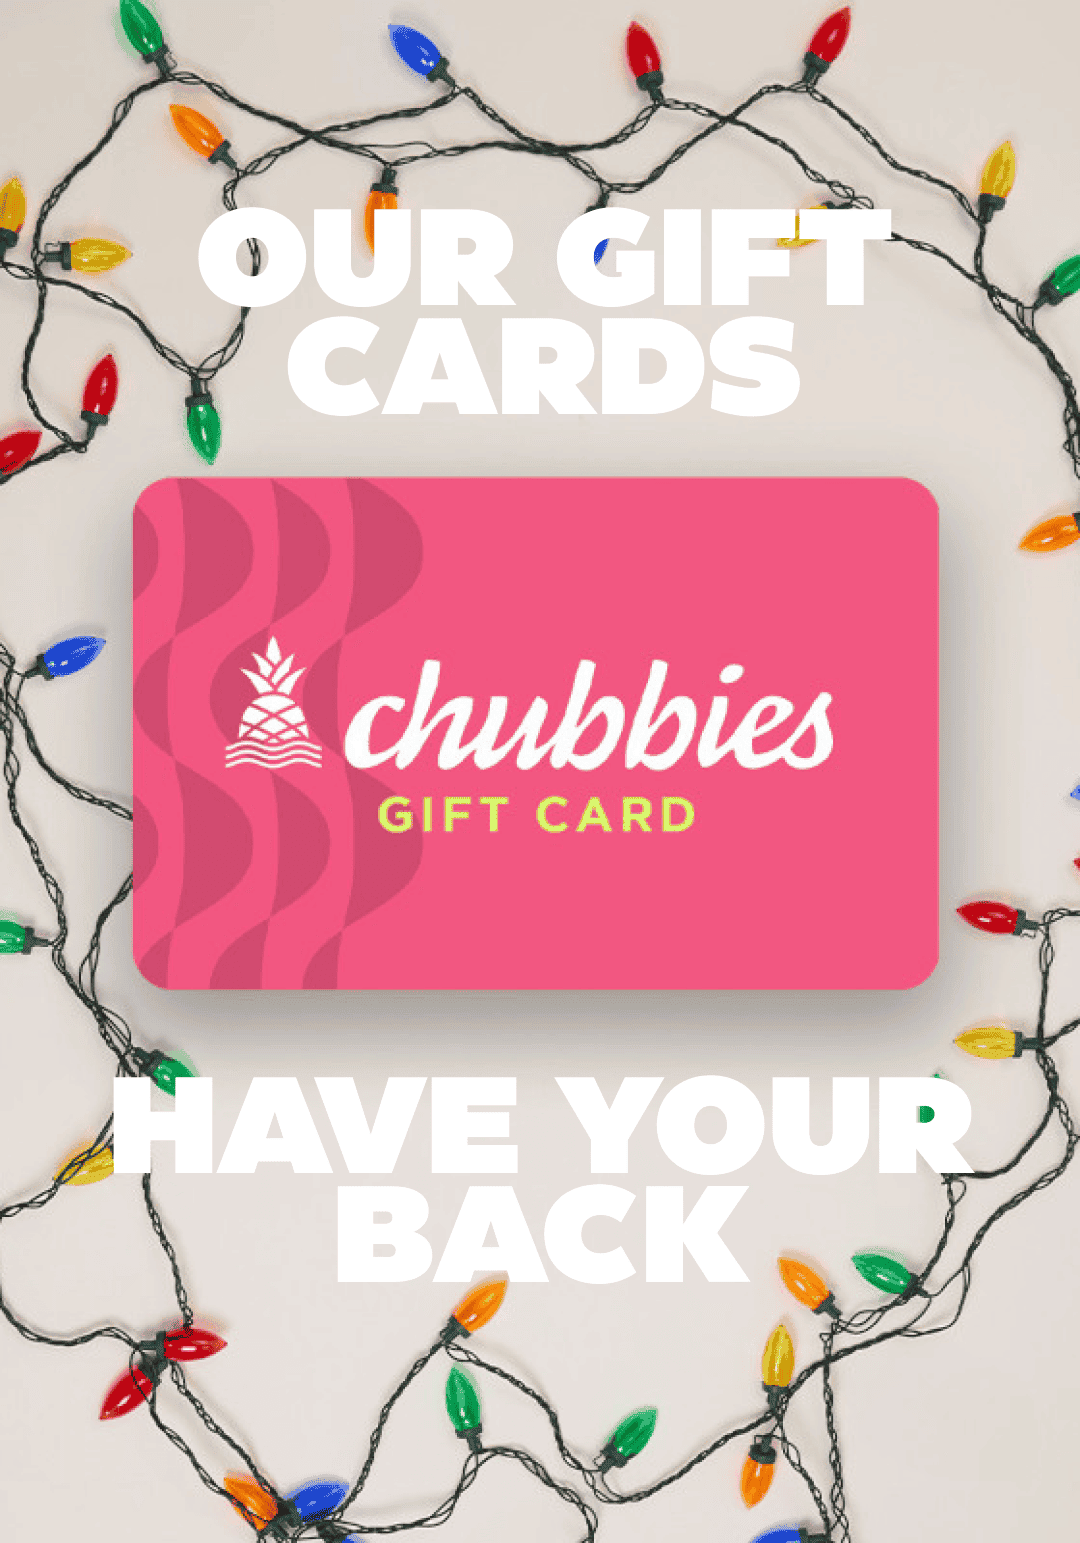 OUR GIFT CARDS HAVE YOUR BACK